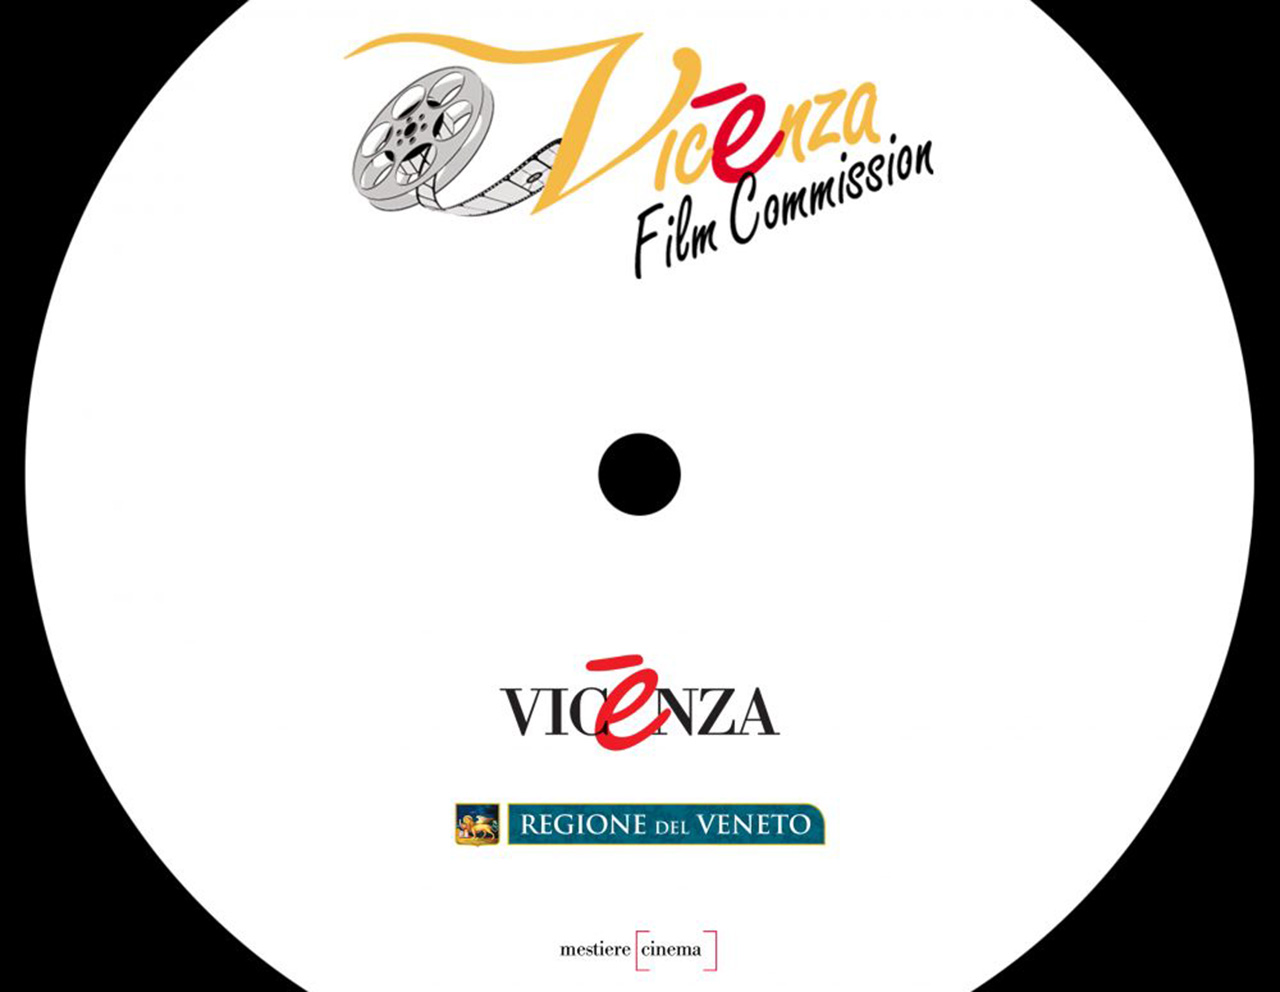 VICENZA FILM COMMISSION PROMOTIONAL VIDEO